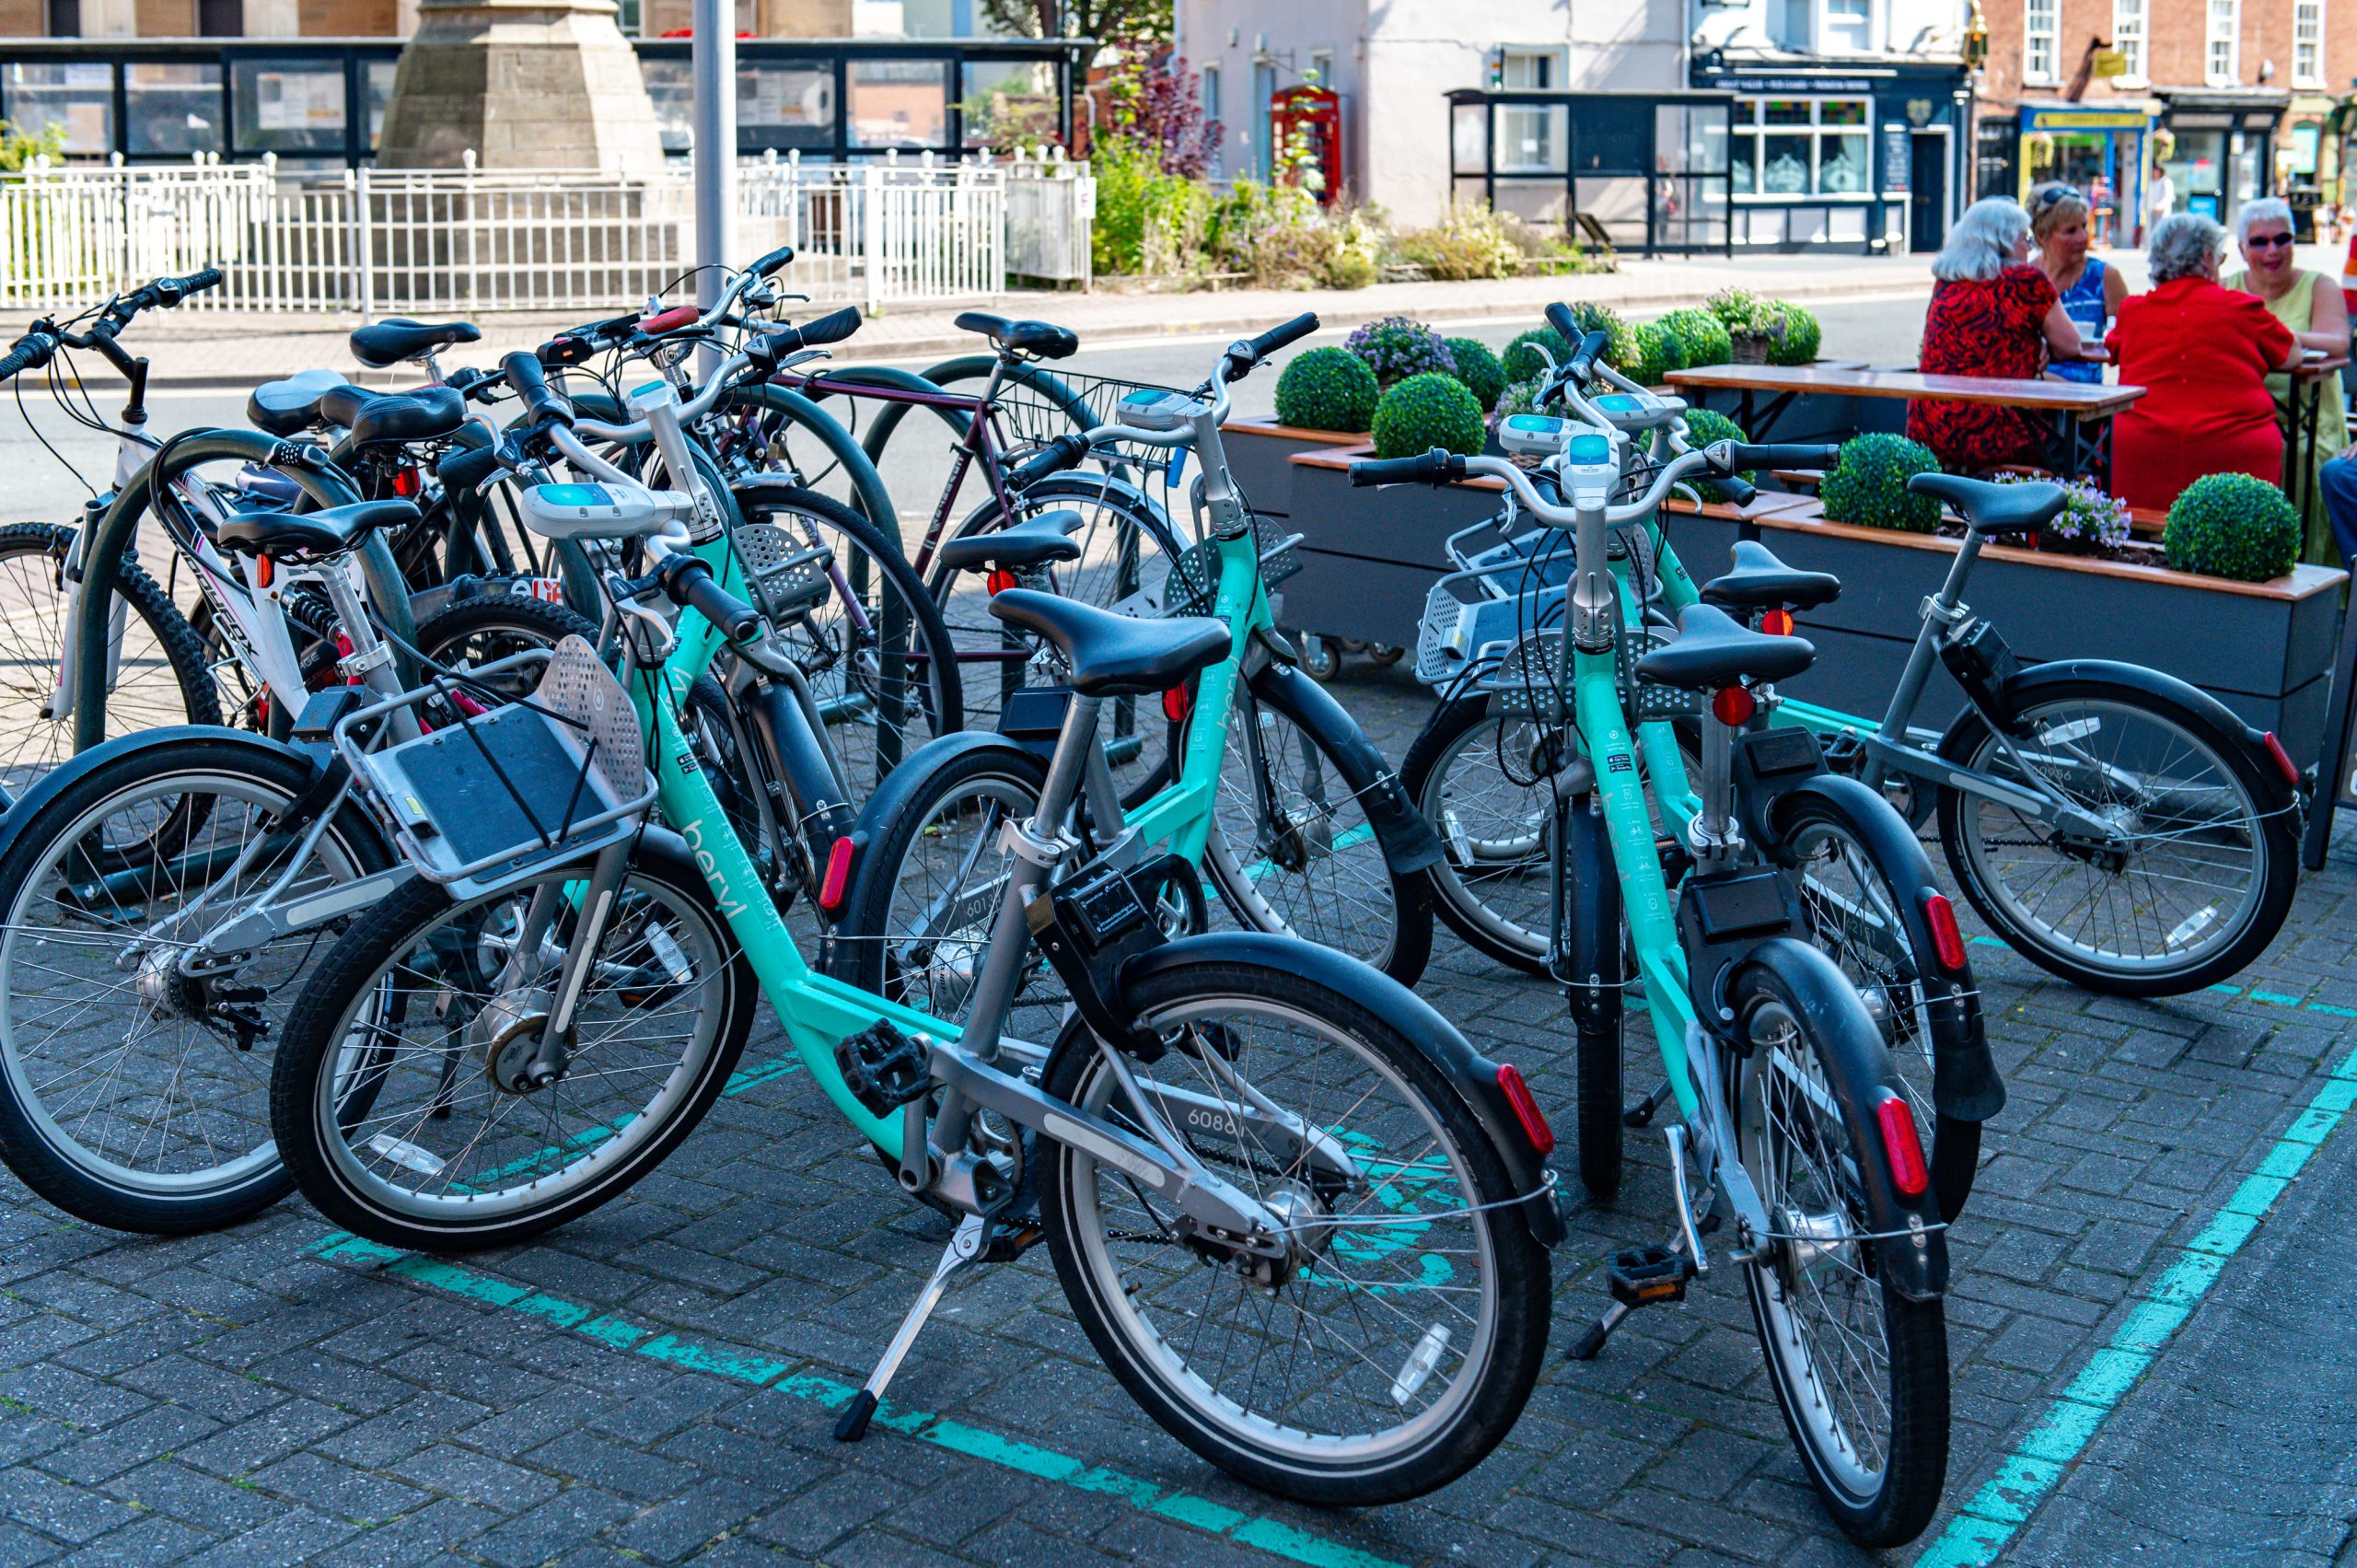 NEWS | Herefordshire Council is funding free rides for up to 60 minutes on Beryl Bikes in Hereford over the next two weekends